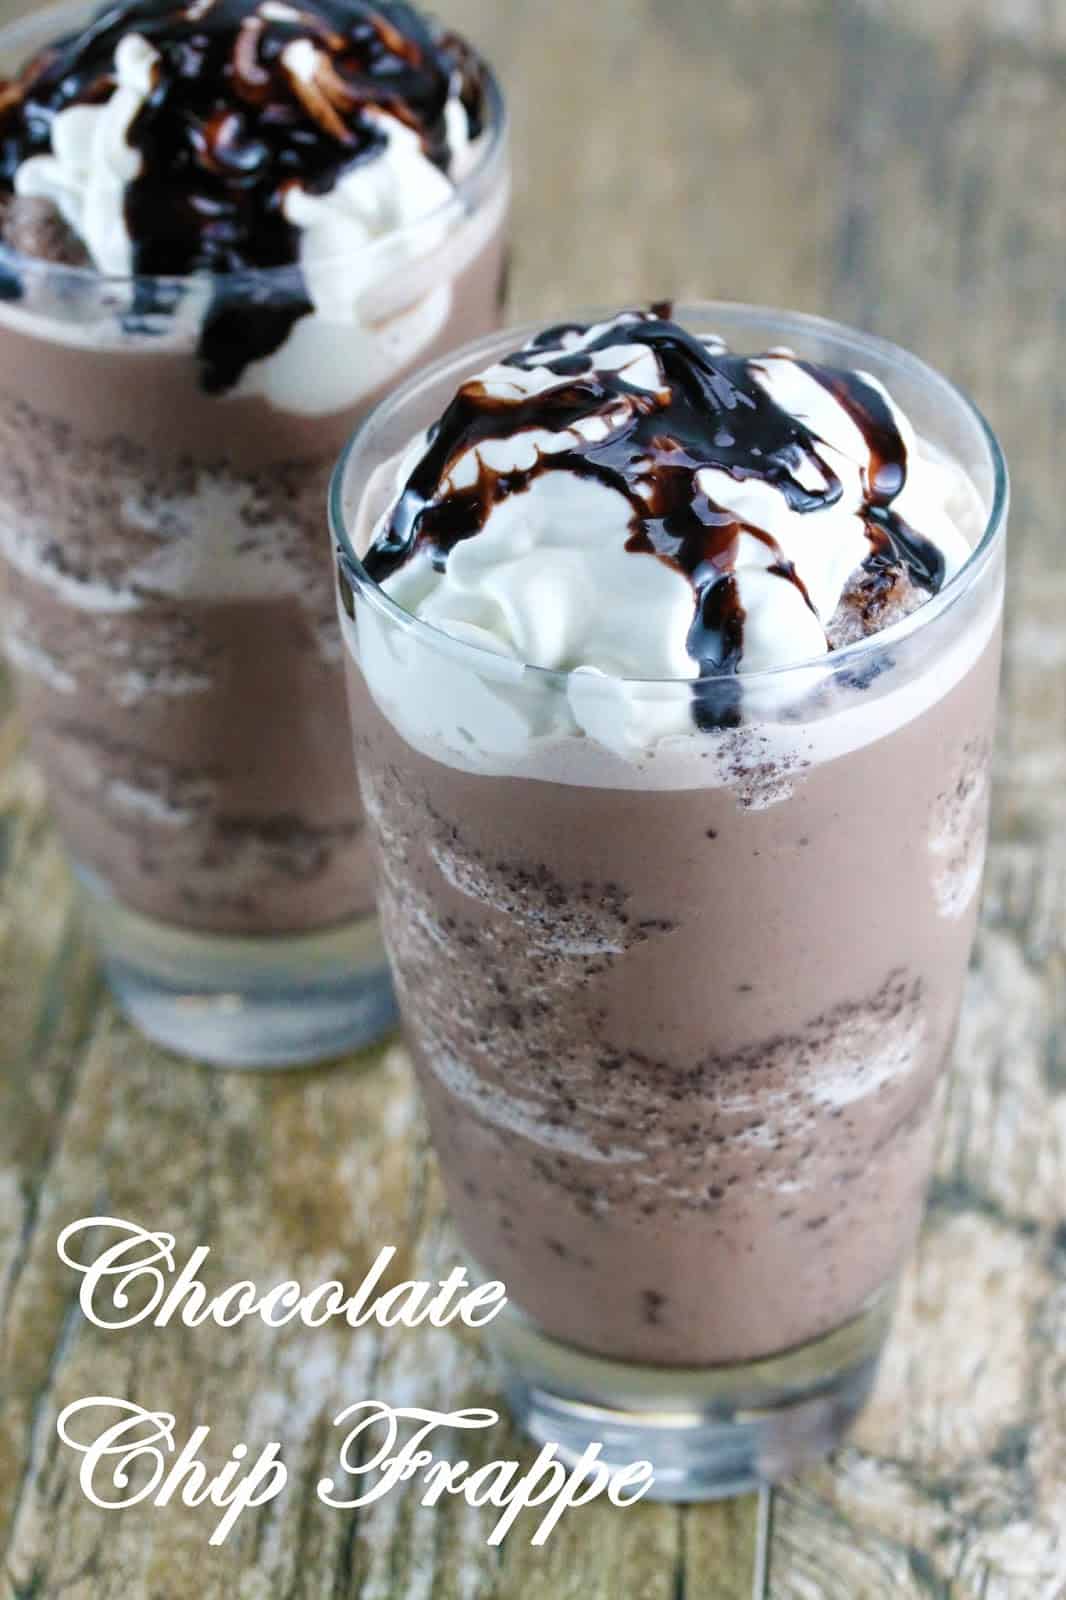 Homemade Chocolate Chip Frappe